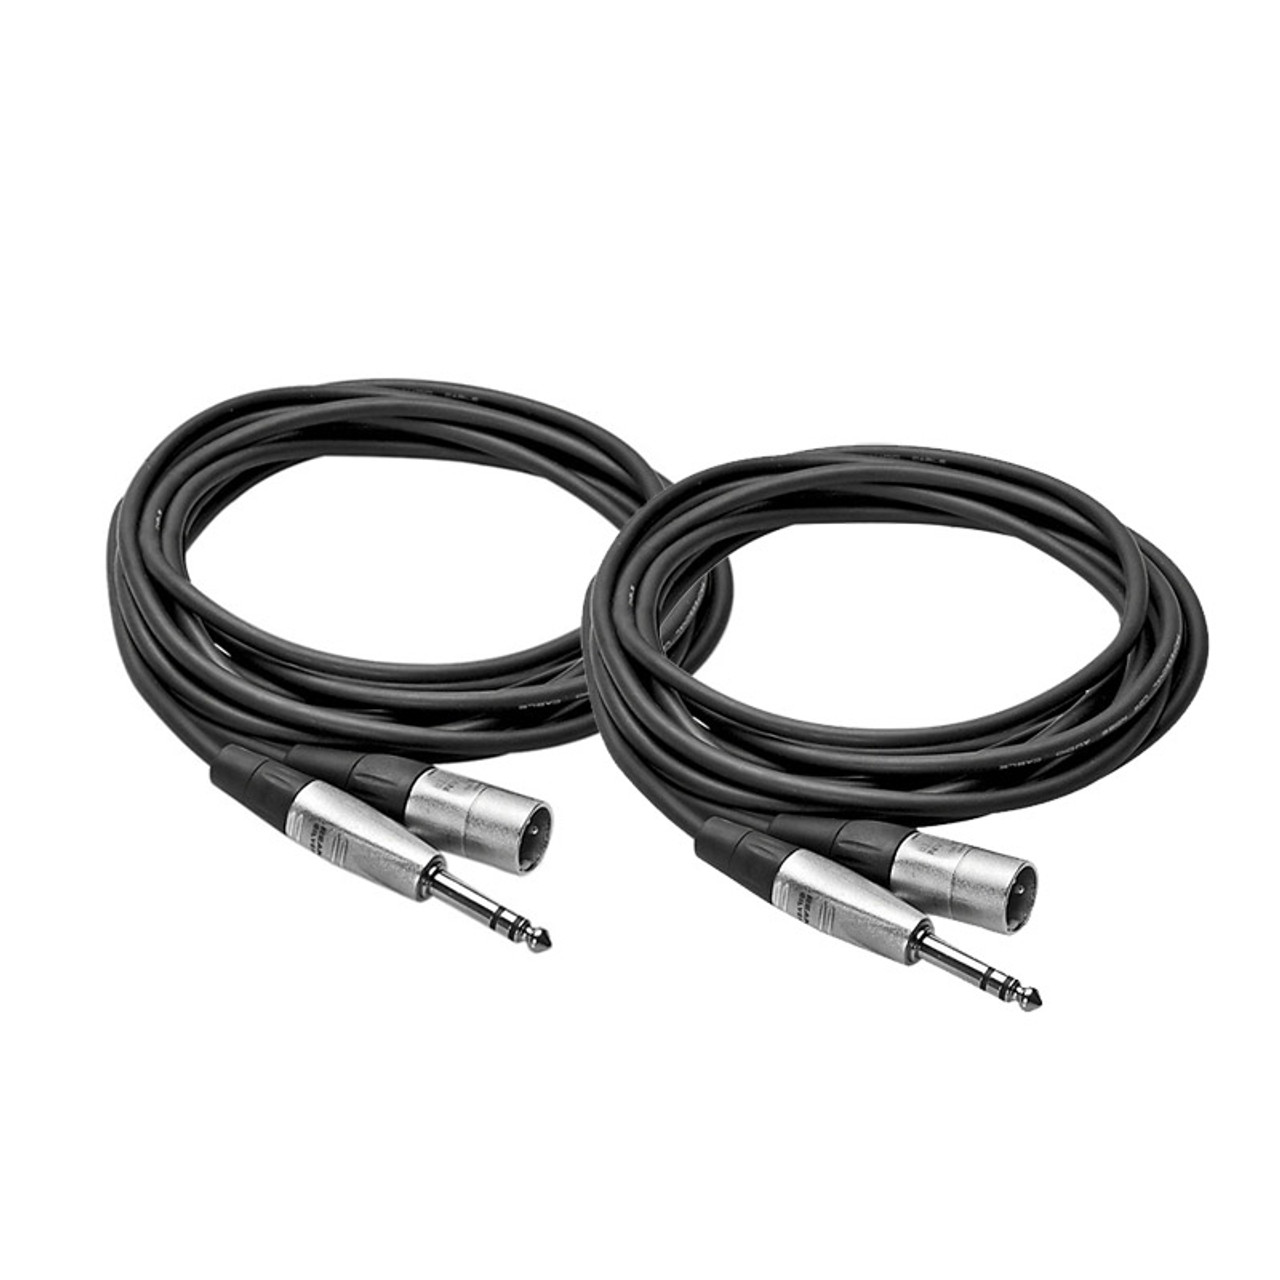 What Cables Do You Need To Hook Up Studio Monitors To Audio Interface